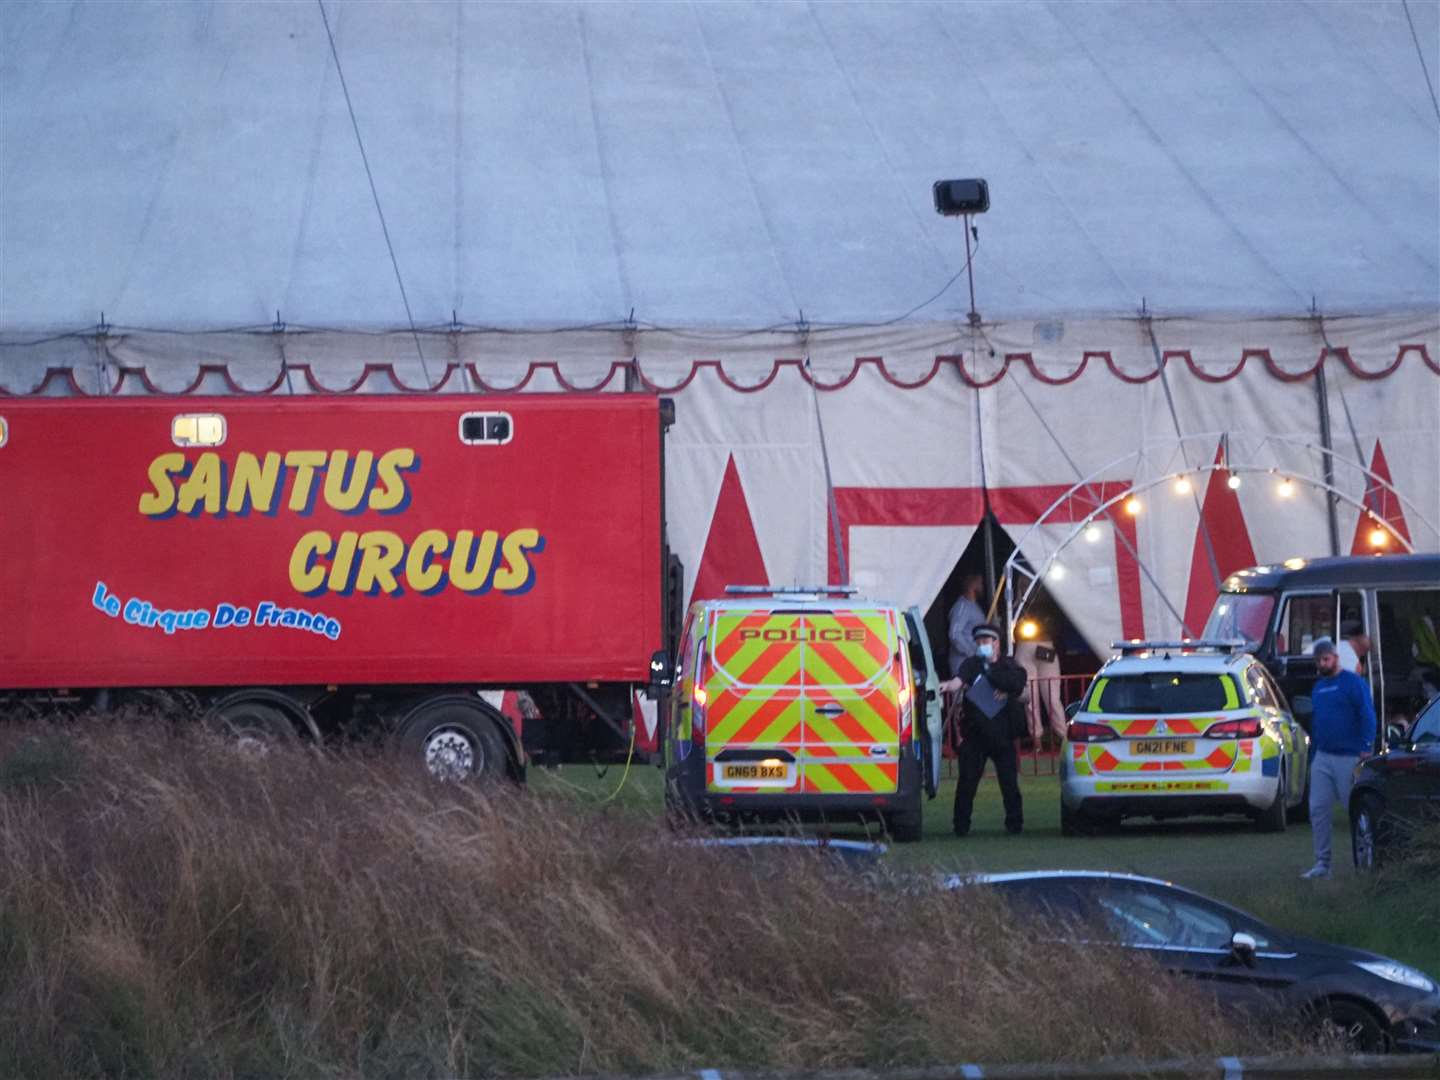 Emergency services at Santus Circus at Barton's Point Coastal Park in Sheerness after a trapeze artiste fell during a show. Picture: James Bell